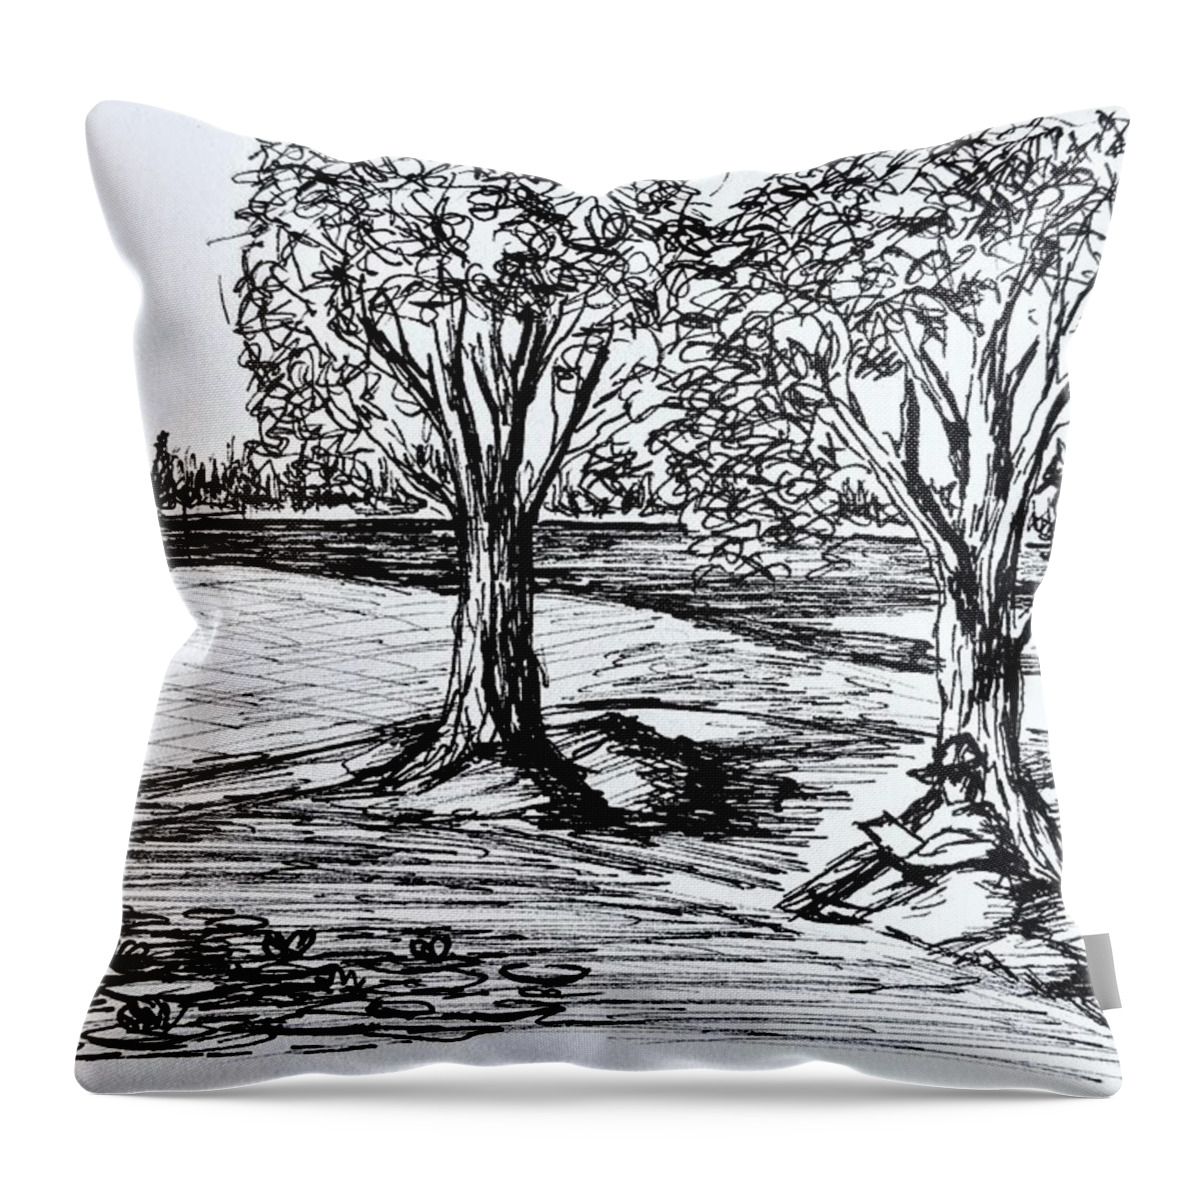 Black And White Throw Pillow featuring the drawing Shade Trees by Tammy Nara